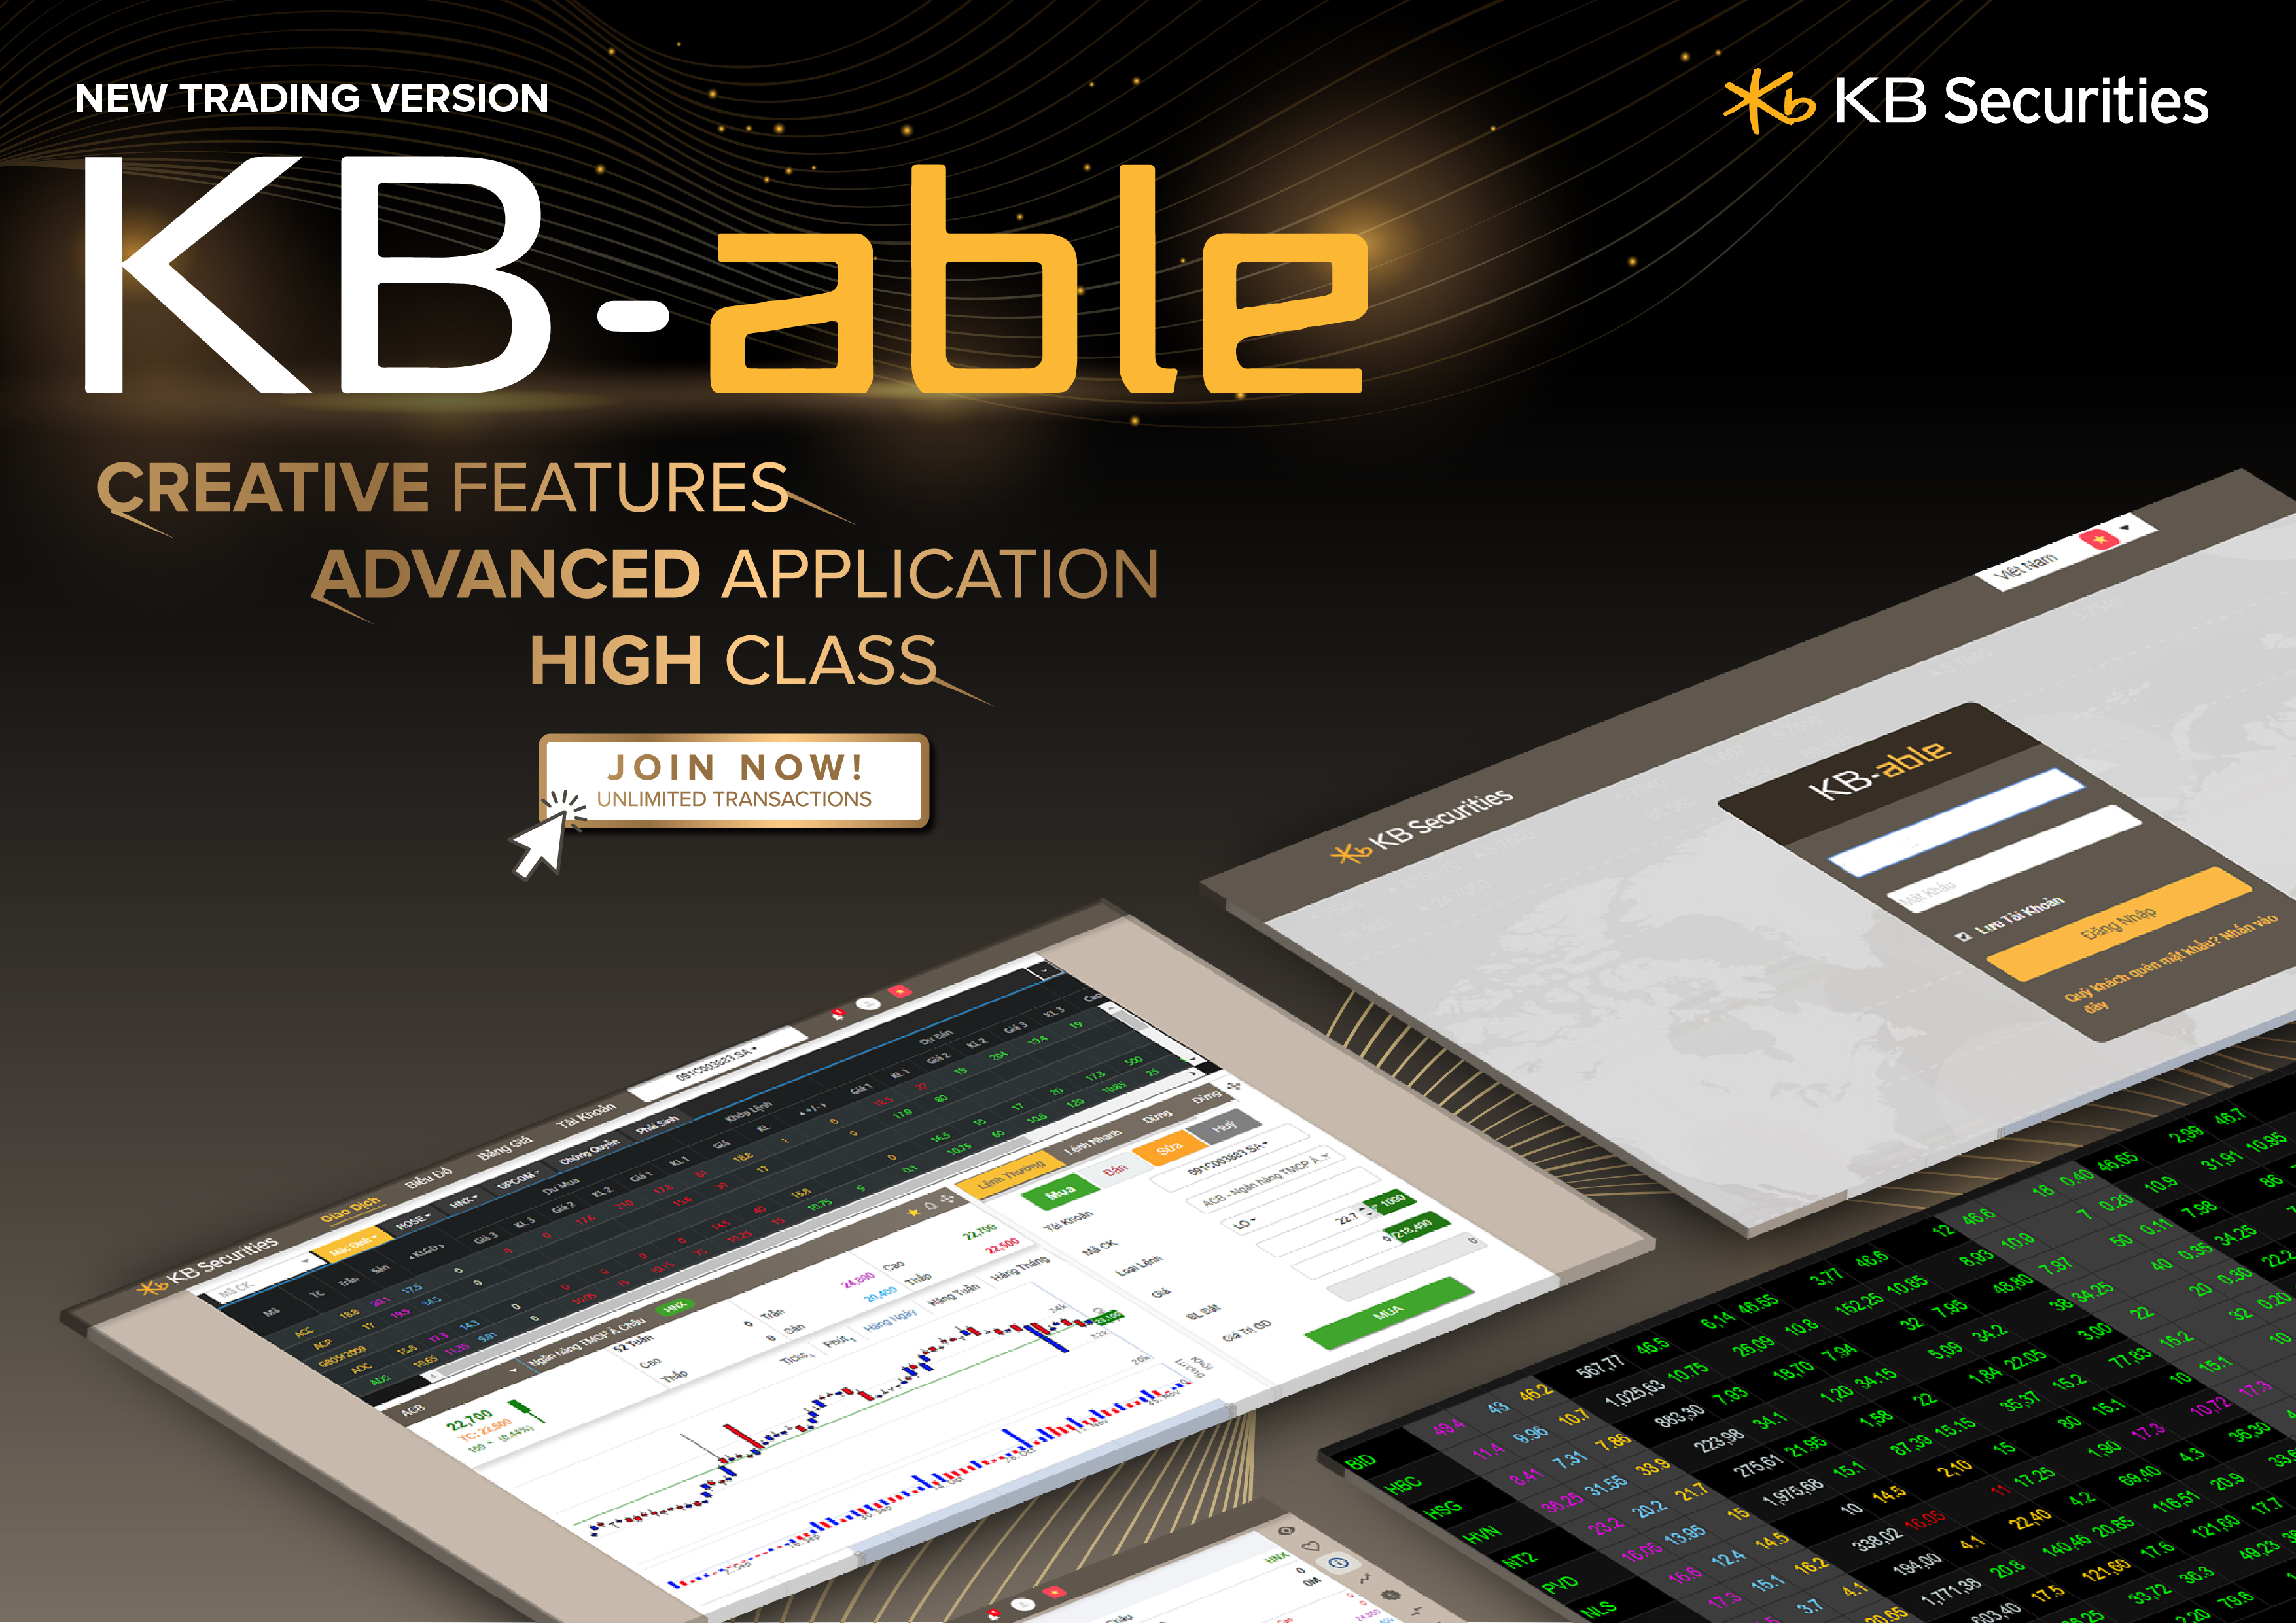 KBSV launching KB-able - “unlimited trading system